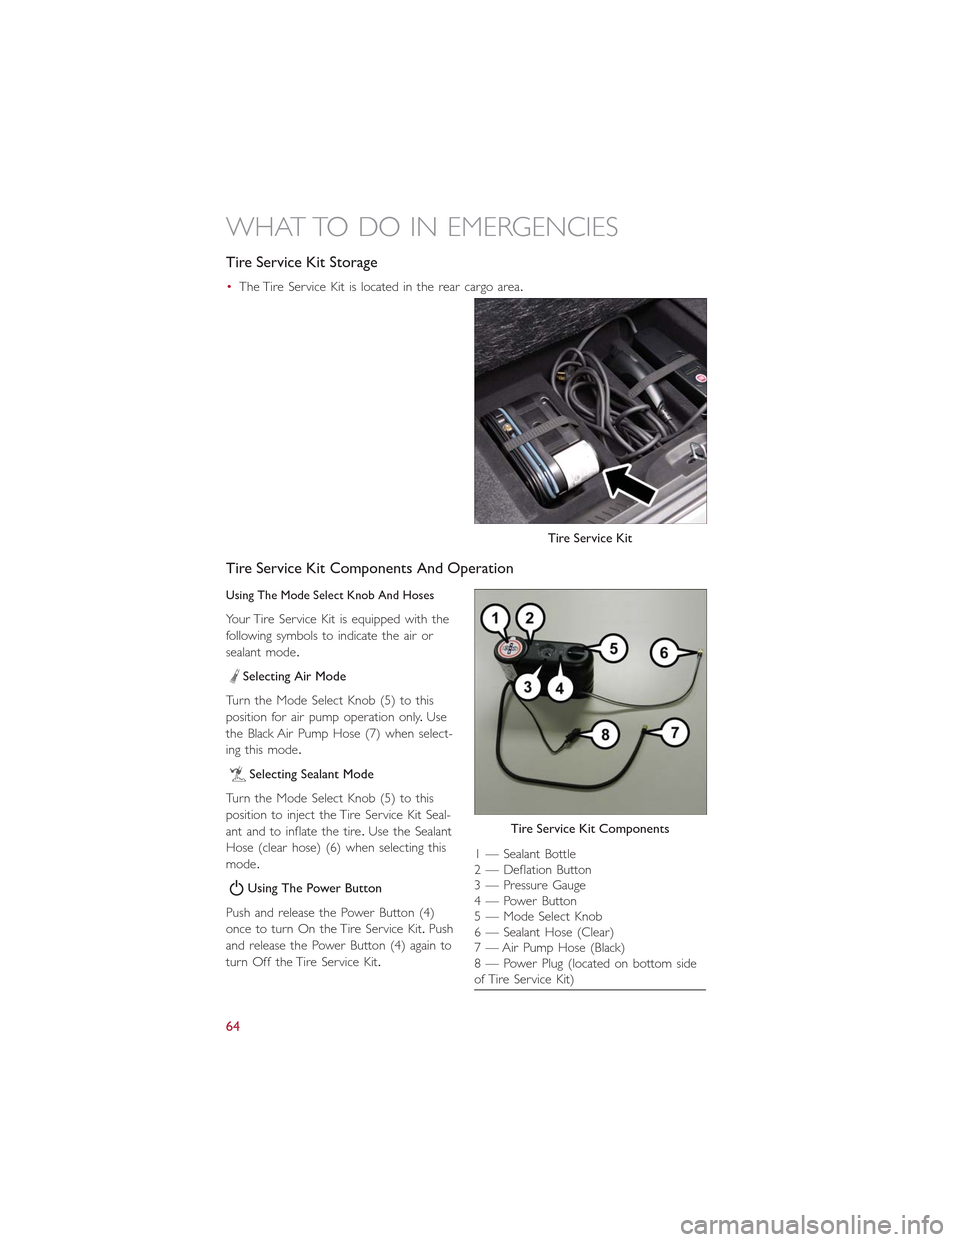 FIAT 500E 2015 2.G Repair Manual Tire Service Kit Storage
•The Tire Service Kit is located in the rear cargo area.
Tire Service Kit Components And Operation
Using The Mode Select Knob And Hoses
Your Tire Service Kit is equipped wit